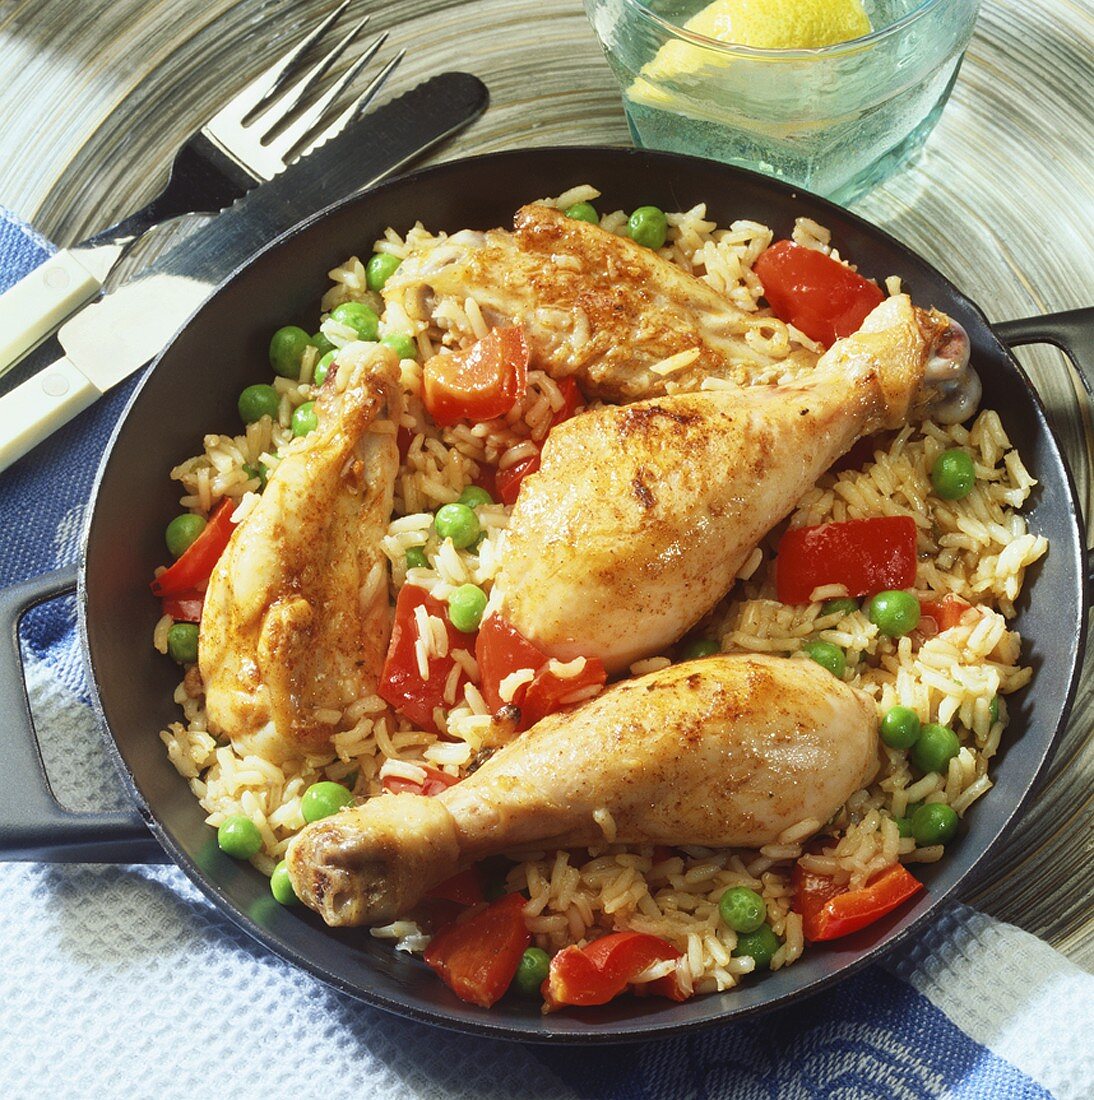 Fried chicken legs on vegetable rice